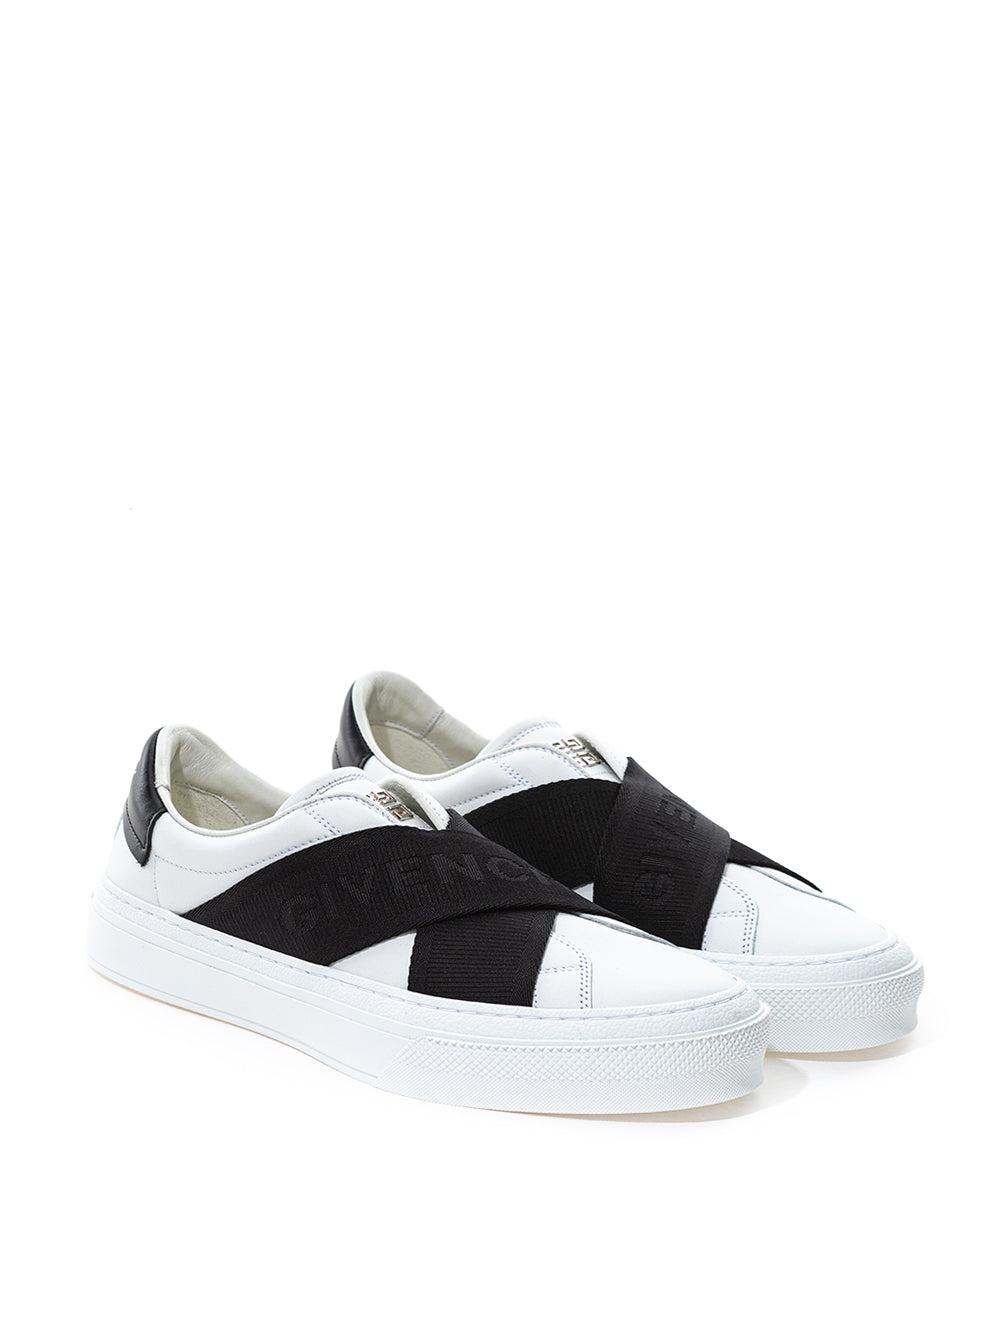 Chic White Leather City Sport Sneakers